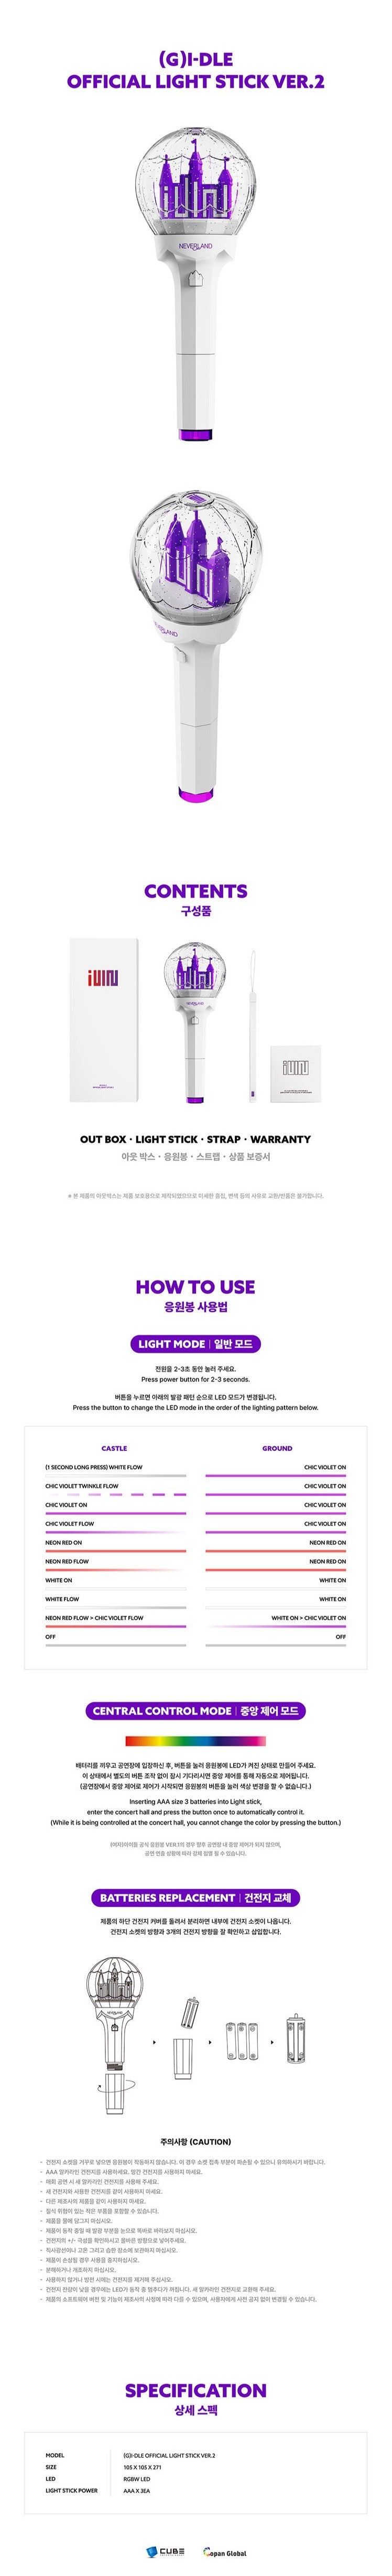  (G) I-DLE Official Light Stick : Sports & Outdoors